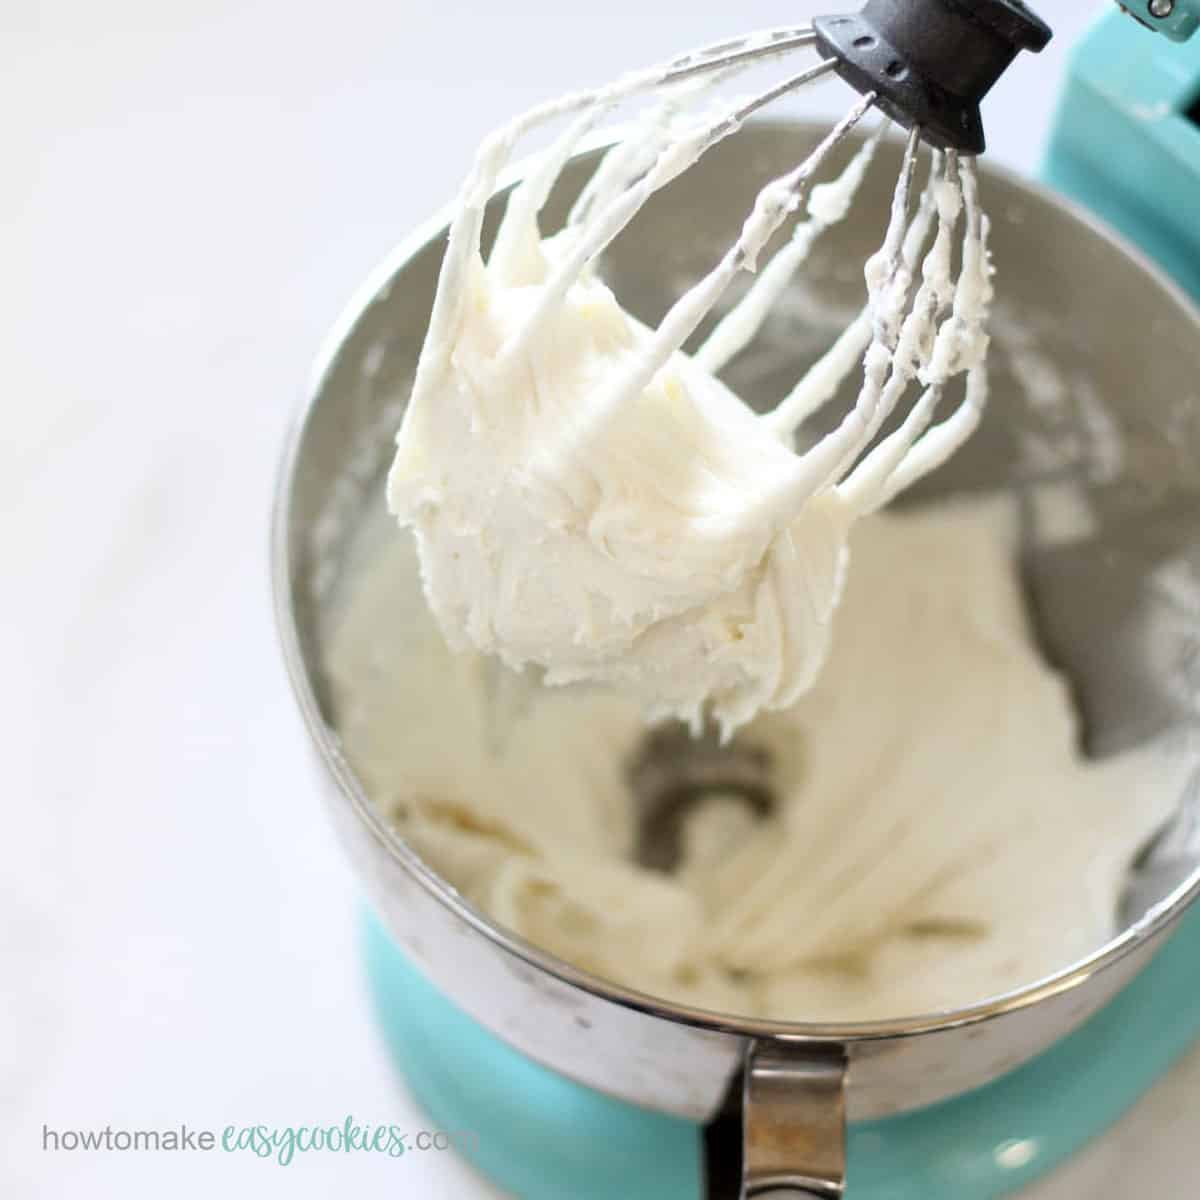 royal icing recipe in standing mixer